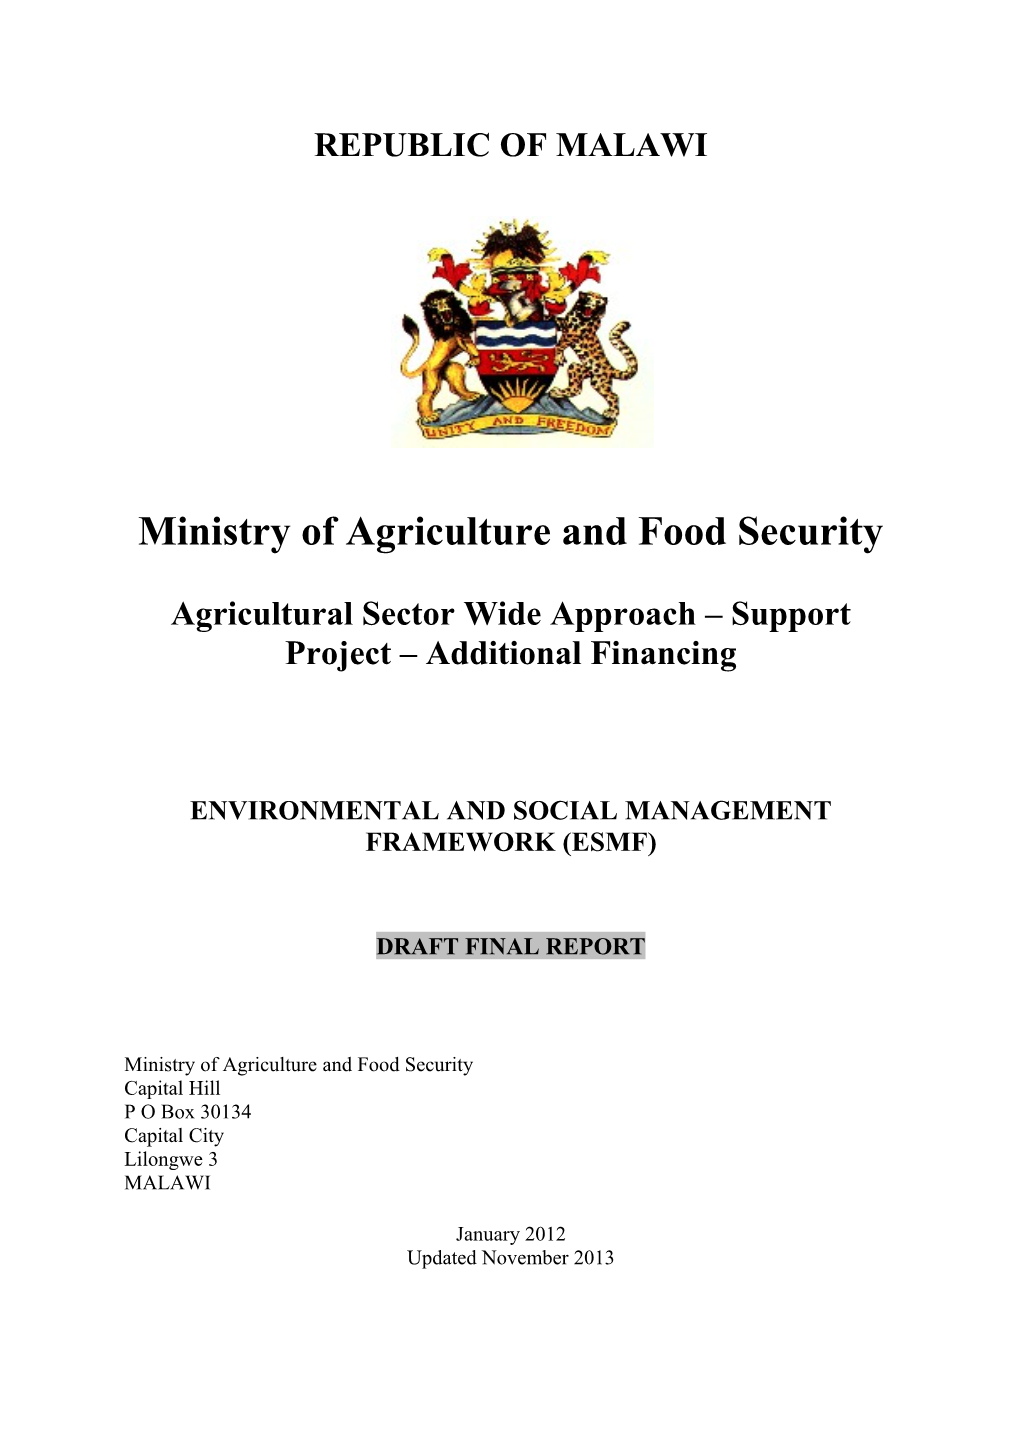 Ministry of Agriculture and Food Security s2